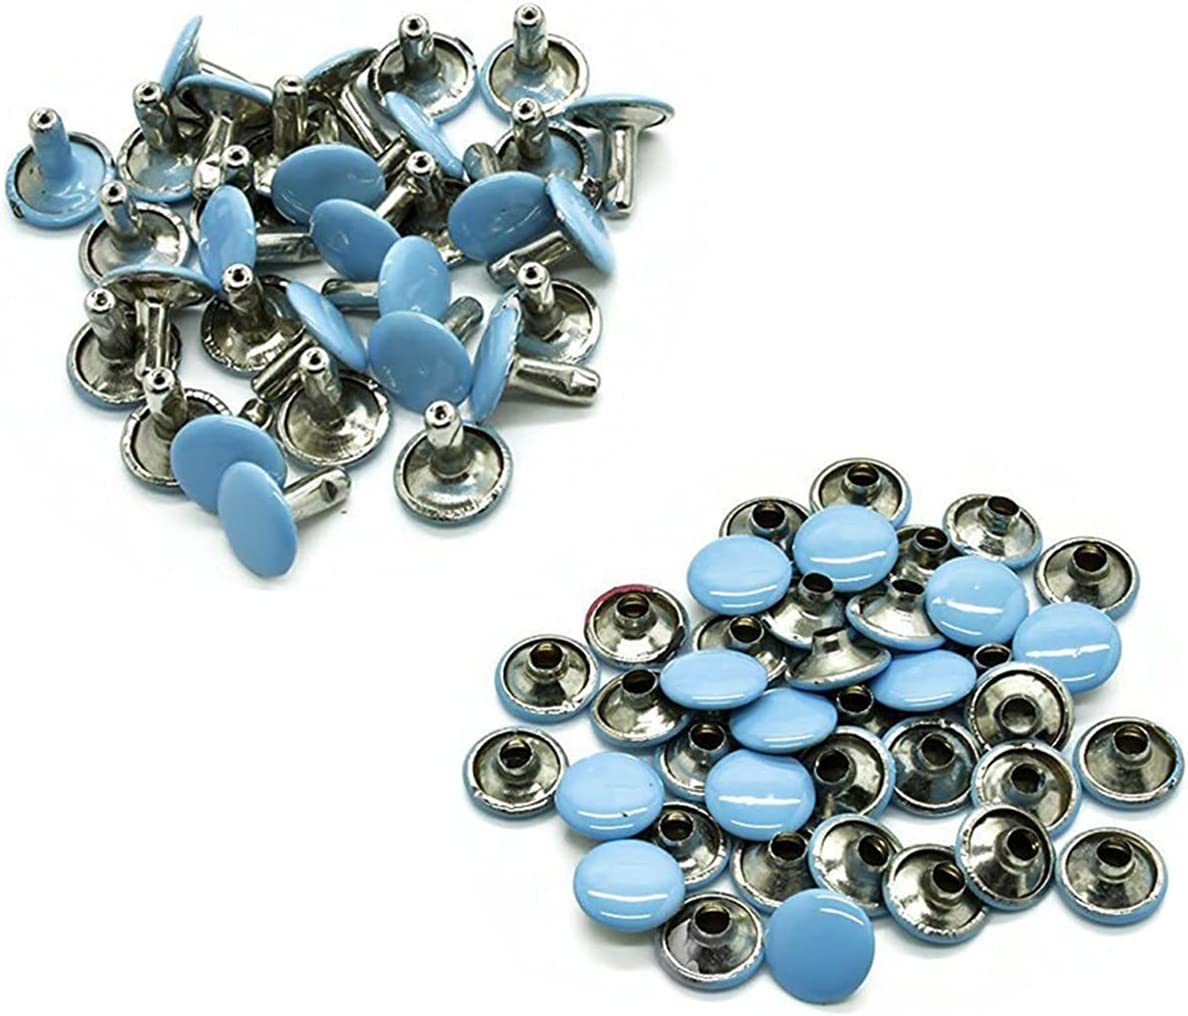 Trimming Shop 10mm Double Cap Rivets, Leather Rivets Tabular Metal Studs  for Clothing Blue, 100 Sets